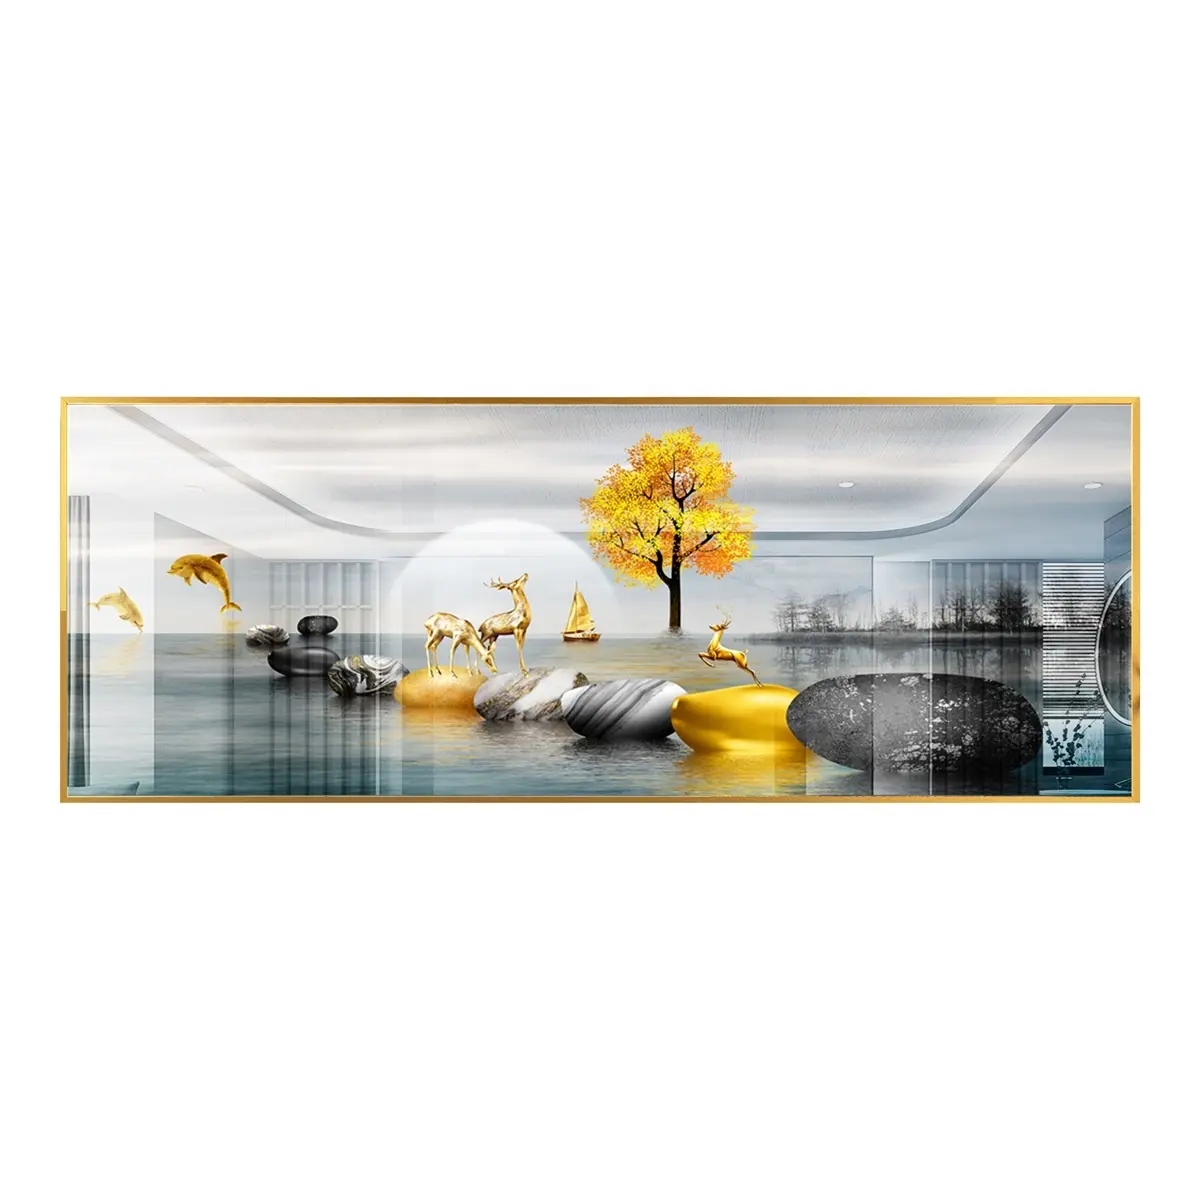 Factory Price Beautiful Scene Art Crystal Porcelain Abstract Decorative Wall Hanging Art Painting For Living Room Decoration